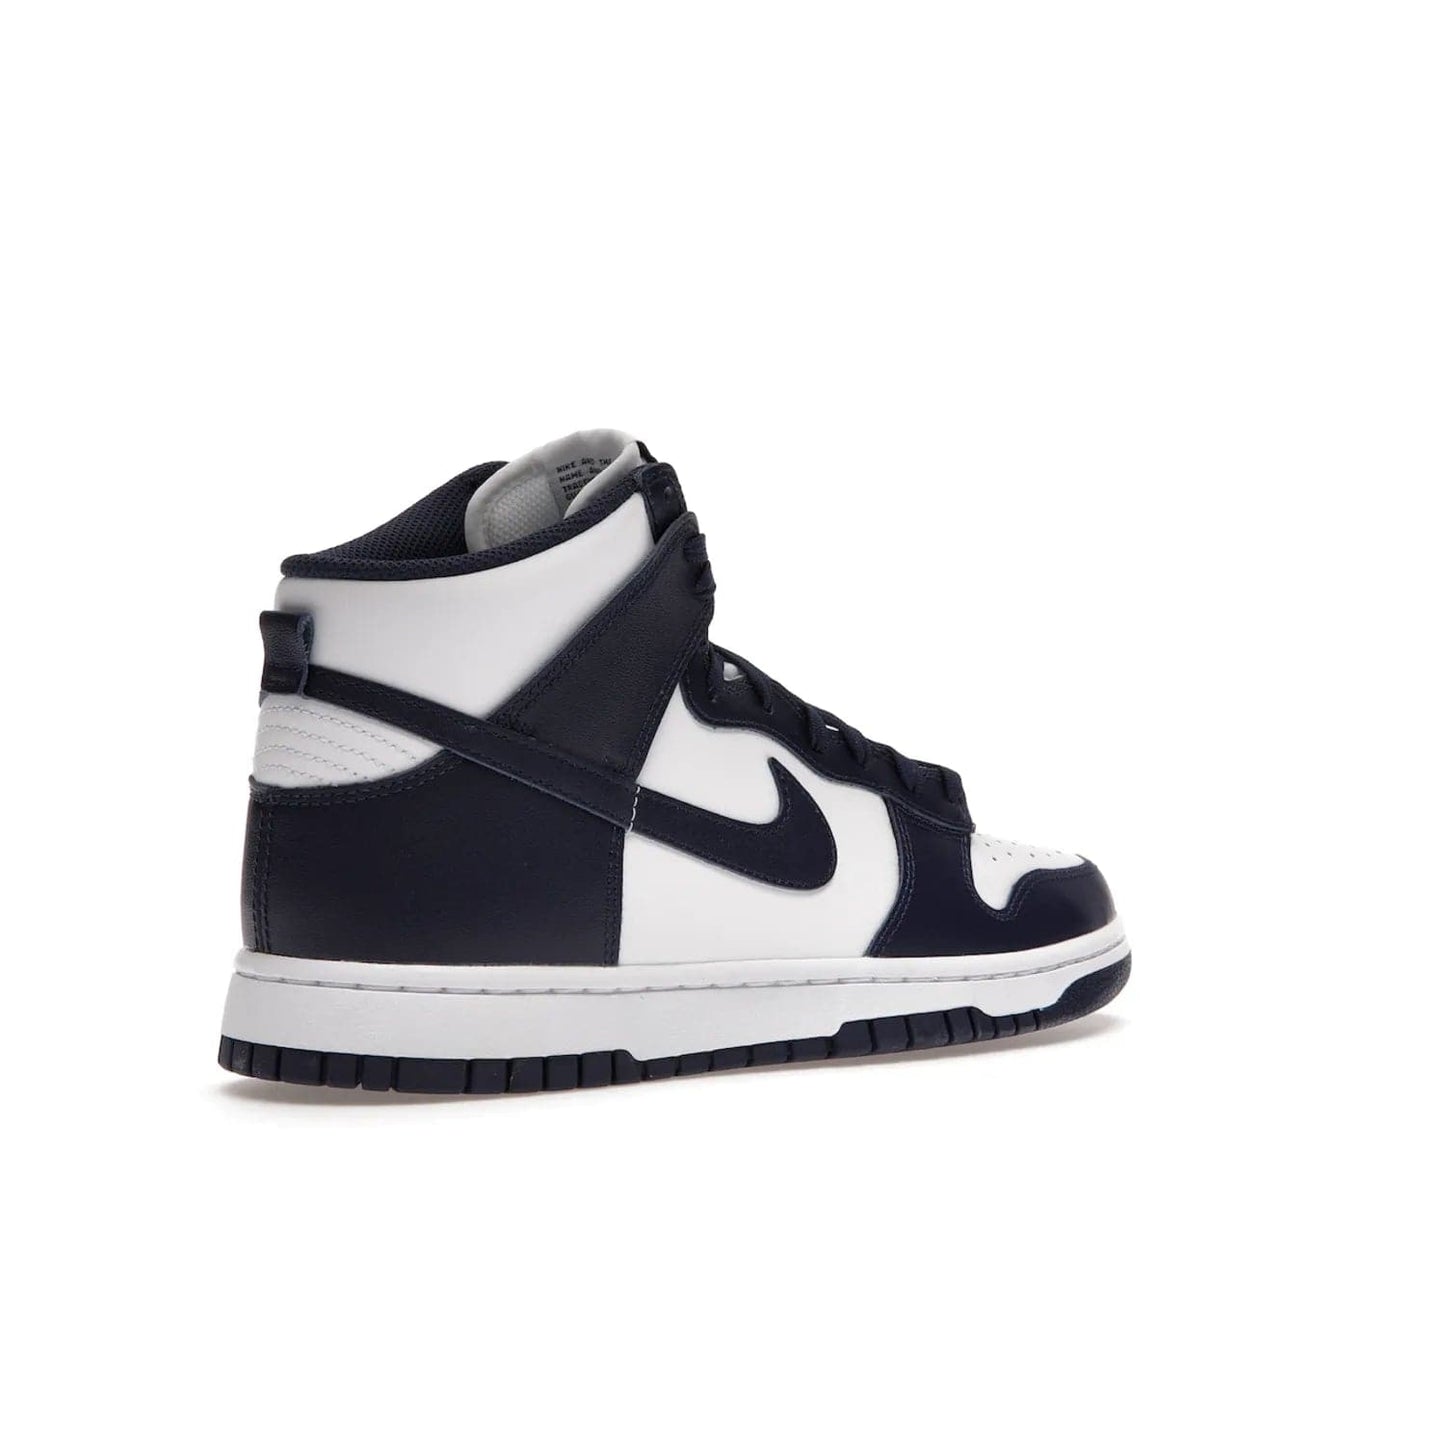 Nike Dunk High Championship Navy - Image 33 - Only at www.BallersClubKickz.com - Classic Nike Dunk High sneaker delivers an unforgettable style with white leather upper, Championship Navy overlays, and matching woven tongue label and sole. Make a statement with the Championship Navy today.